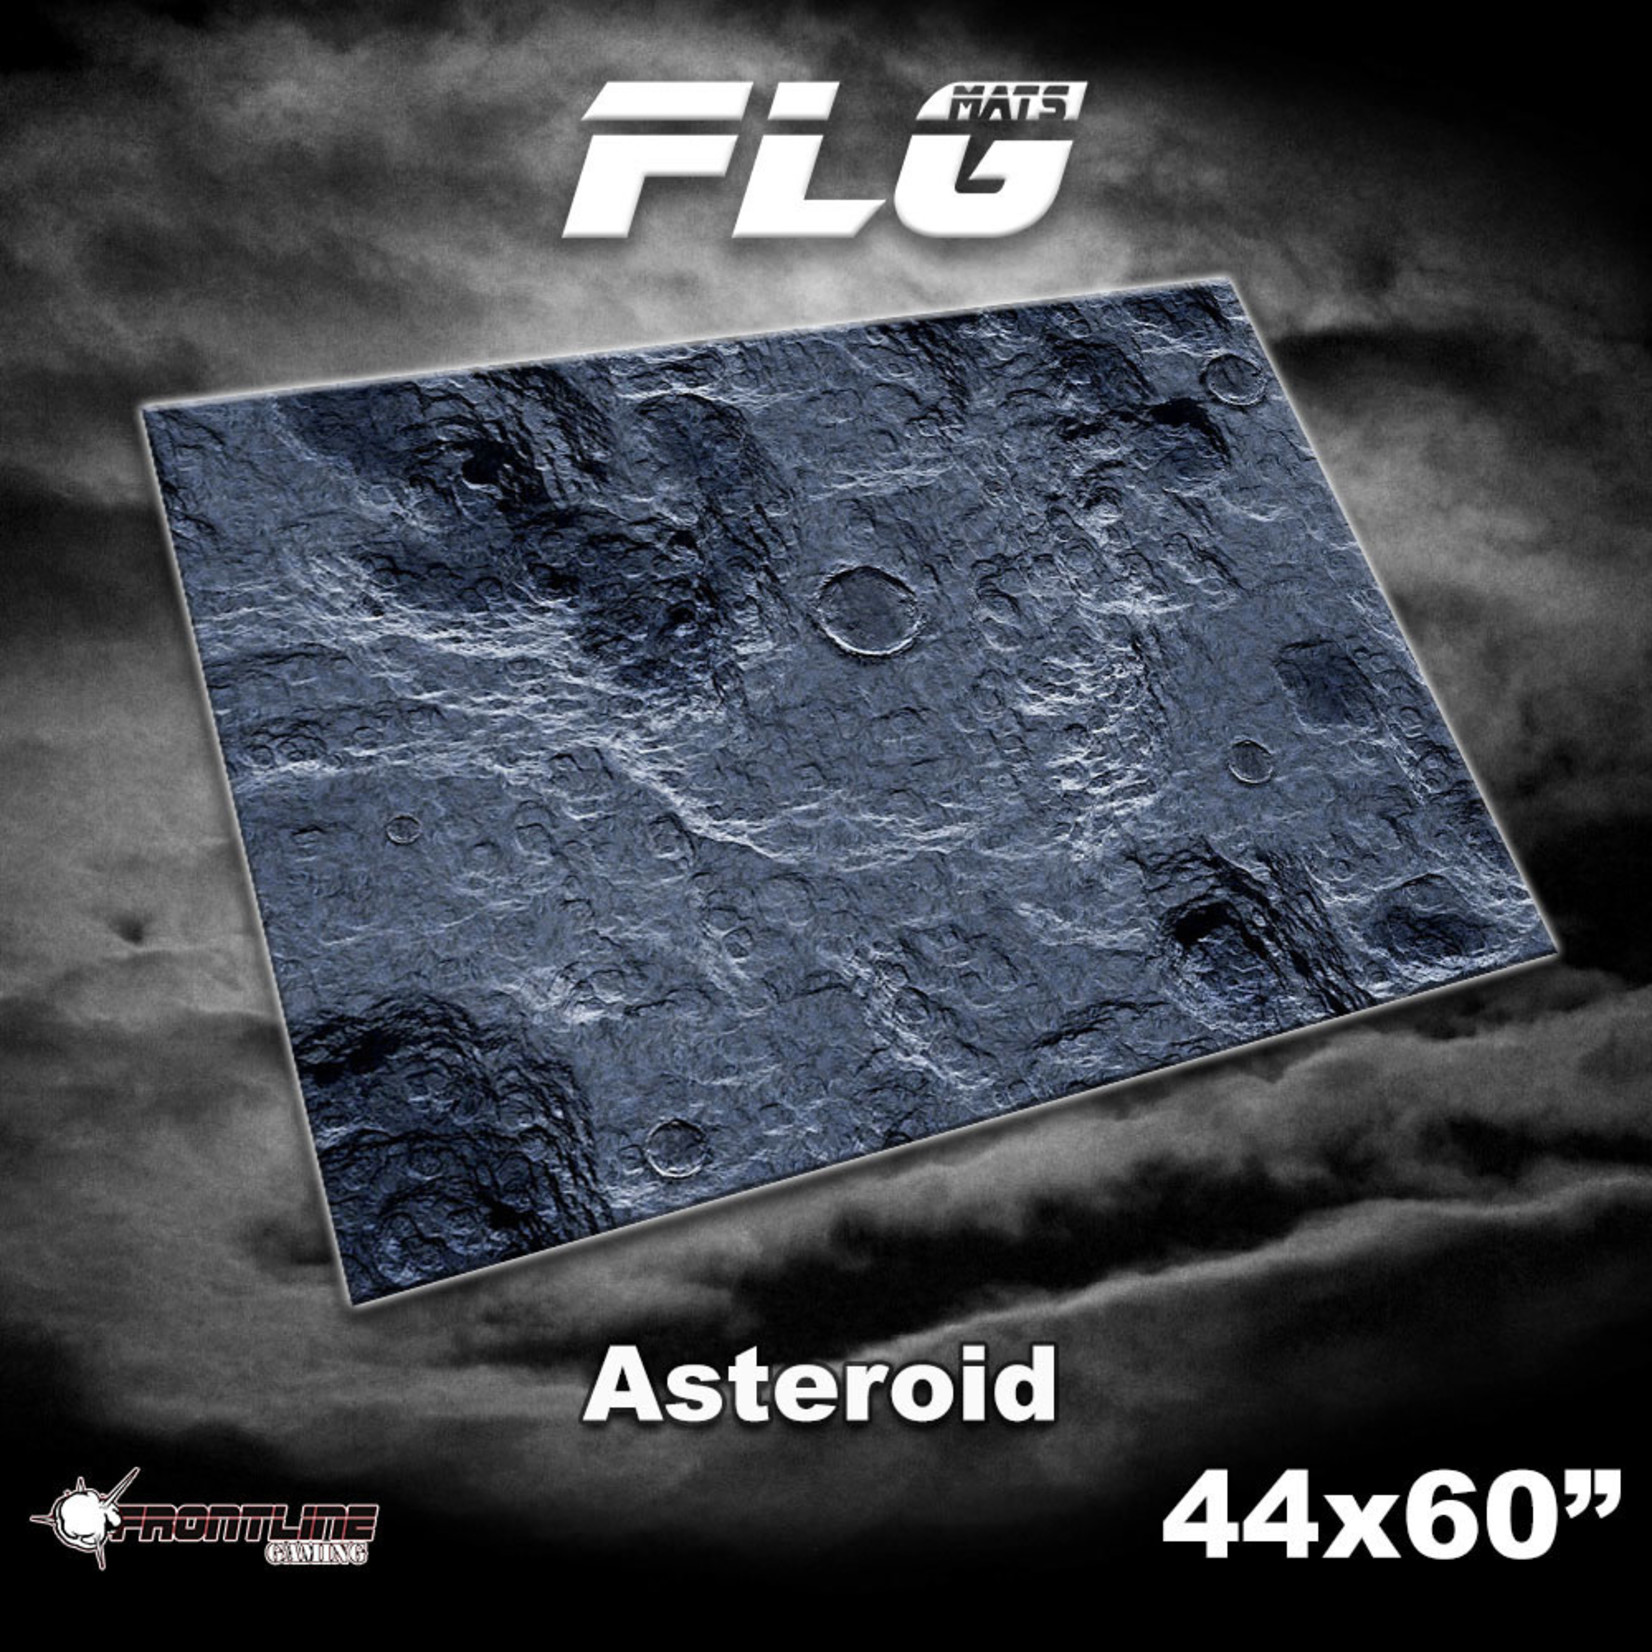 Frontline Gaming FLG Asteroid 44x60